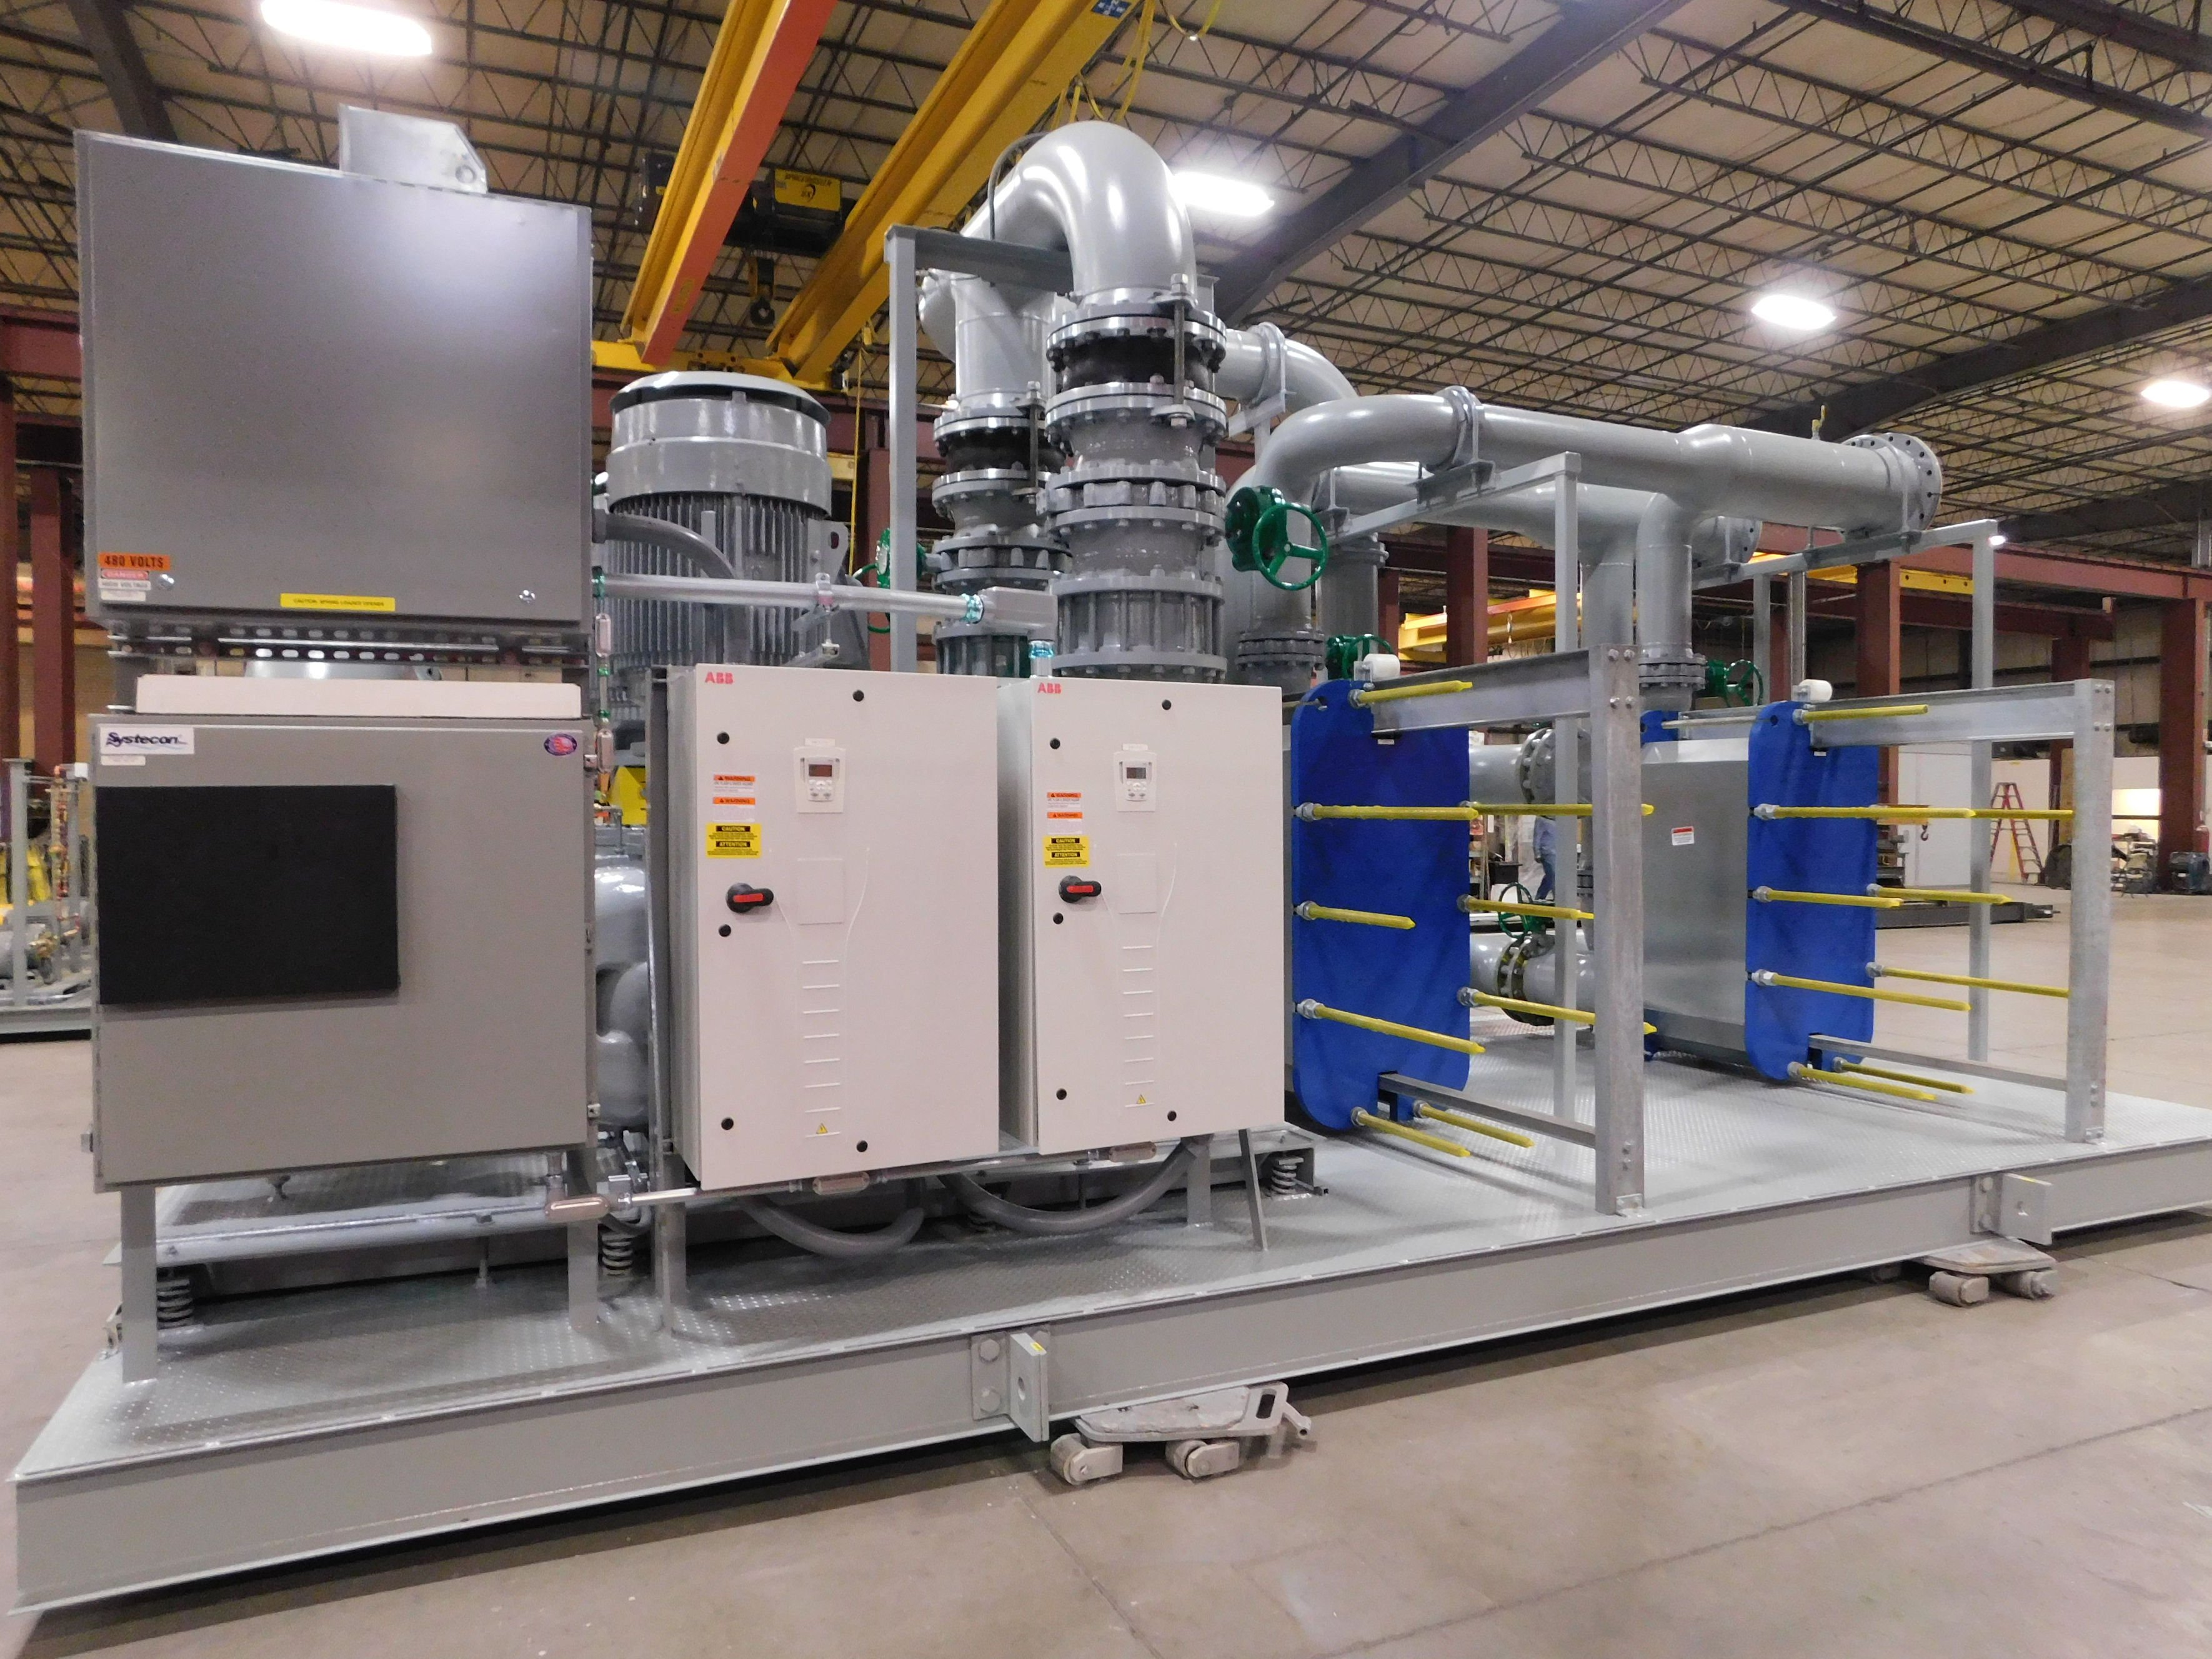 Systecon Twitterren: just shipped this custom, indoor condenser water system 5400 GPM) with #Patterson pumps, #Sondex plate & frame heat exchangers and VFDs. #modular https://t.co/AfxoWQtLNQ" / Twitter